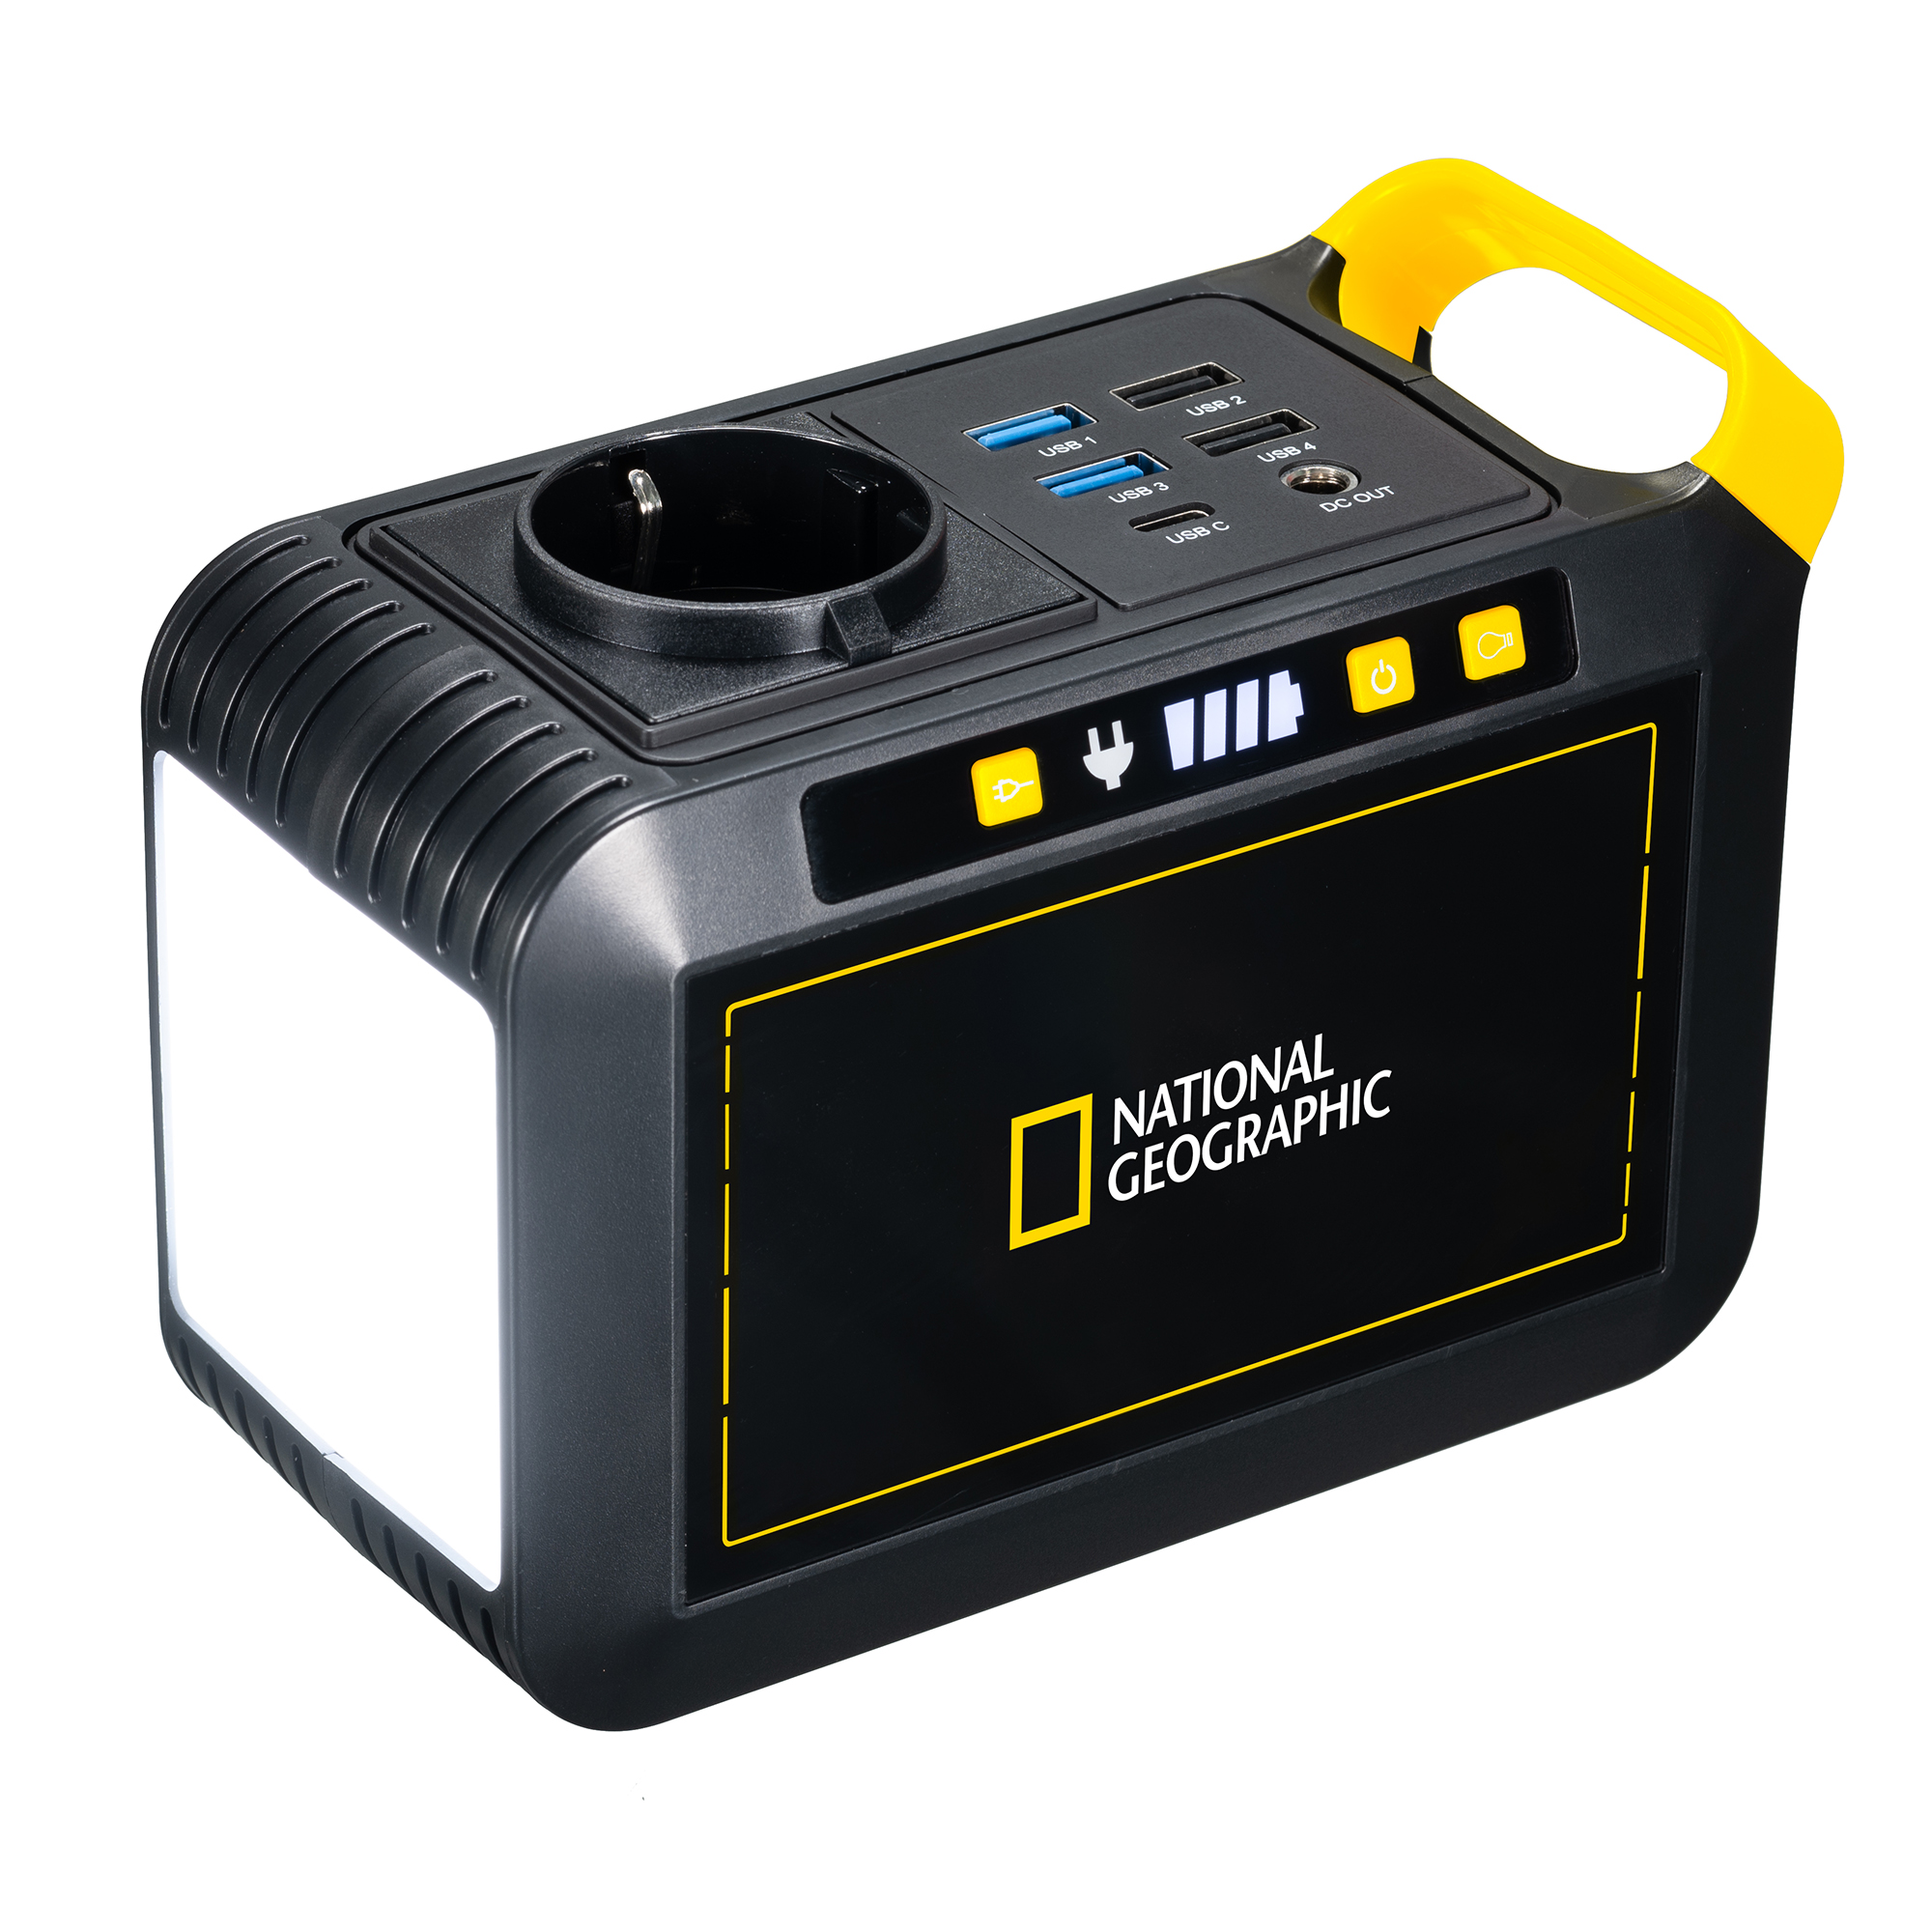 NATIONAL GEOGRAPHIC Mobile Power Station (Refurbished)